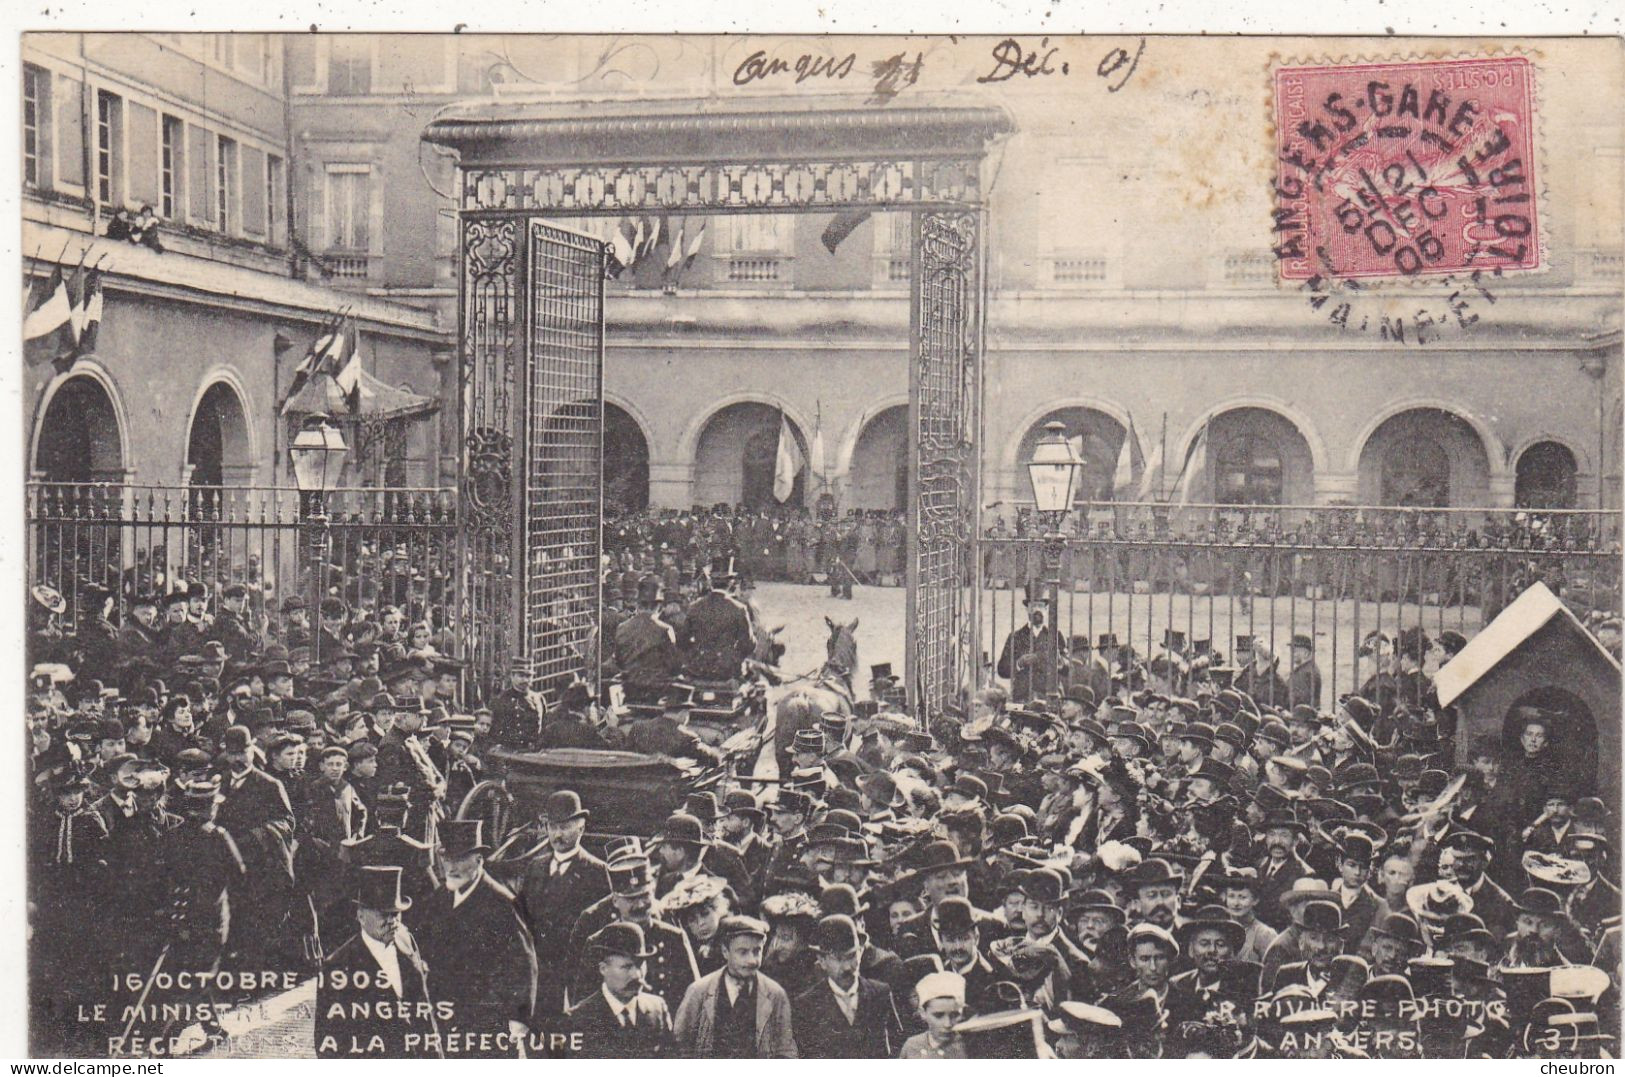 49 .ANGERS. CPA . 16 OCTOBRE 1905.LE MINISTRE A  ANGERS.  RECEPTION A LA PREFECTURE .PHOTO RIVIERE. ANNEE 1905 + TEXTE - Angers